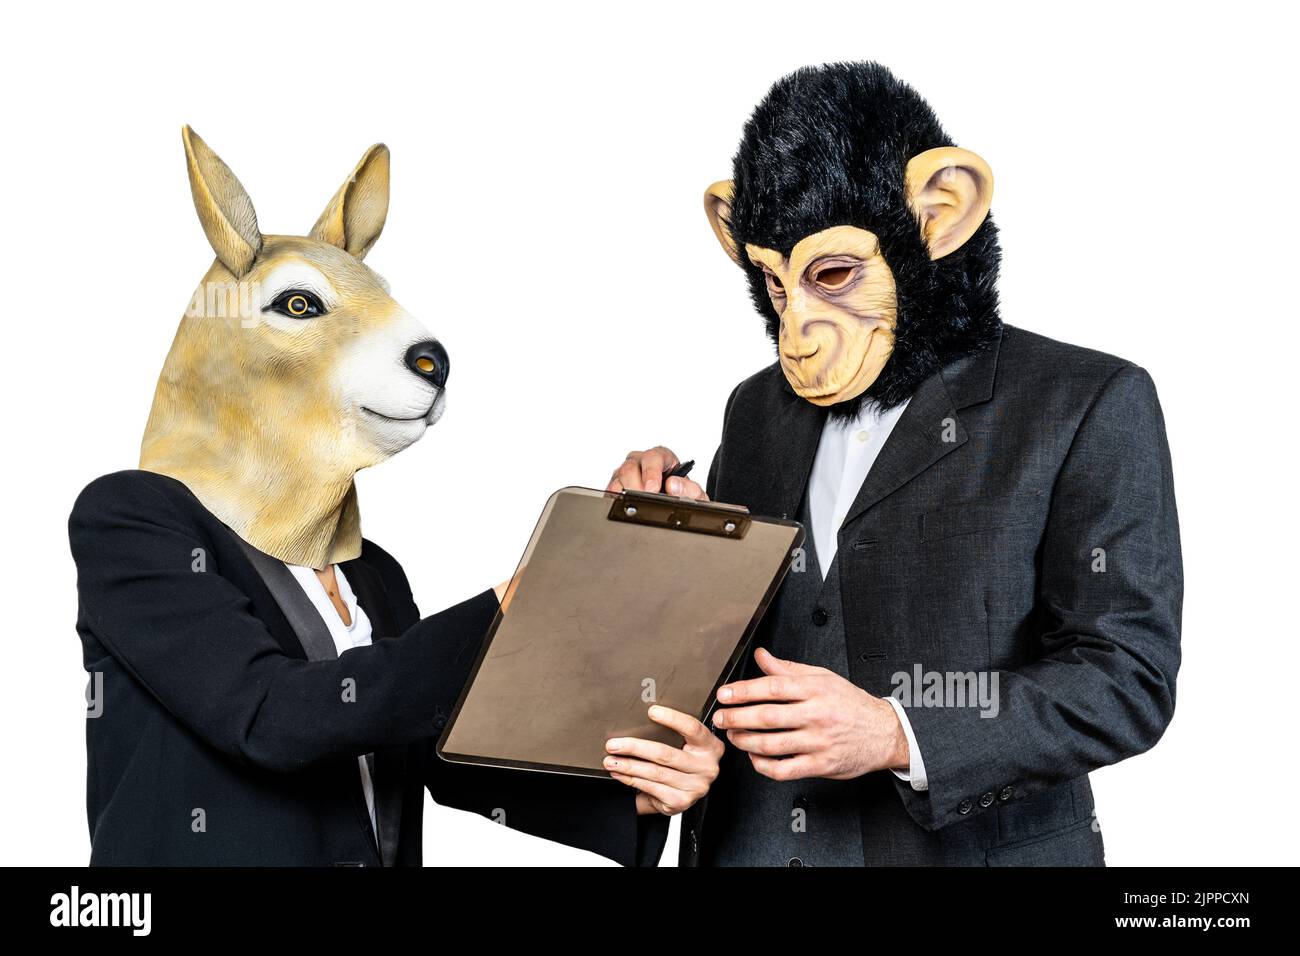 Entrepreneurs or colleagues doing business. Showing a document to sign it, deal concept. Kangaroo and monkey masks. Isolated white background Stock Photo